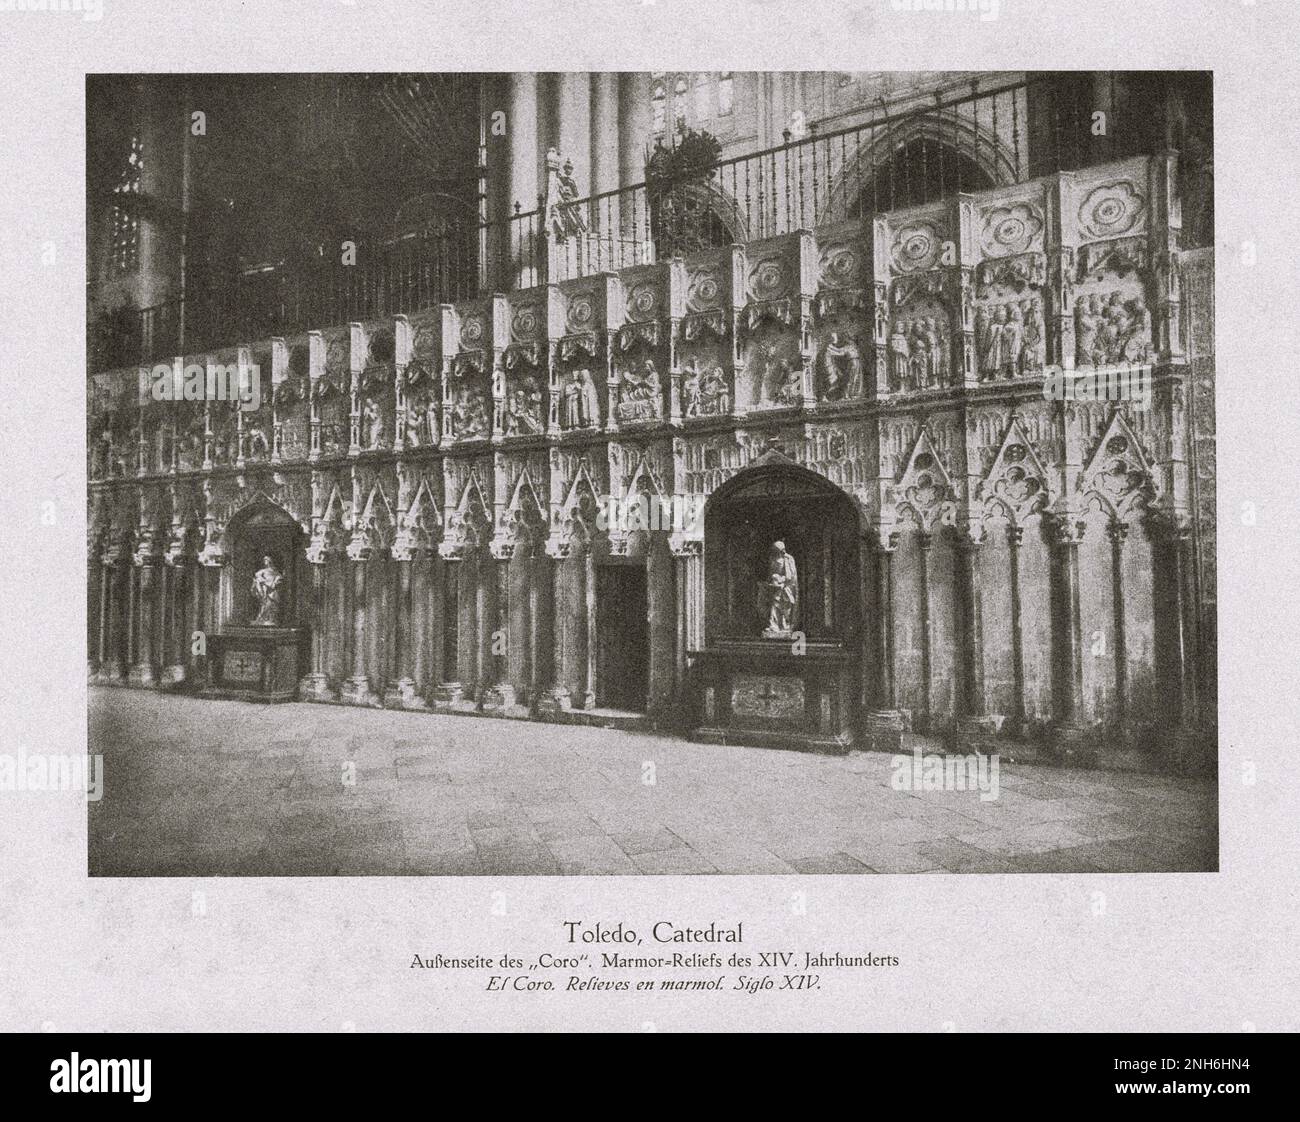 Architecture of Old Spain. Vintage photo of Toledo Cathedral (Catedral Primada Santa María de Toledo). The Primatial Cathedral of Saint Mary of Toledo (Spanish: Catedral Primada Santa María de Toledo), otherwise known as Toledo Cathedral, is a Roman Catholic church in Toledo, Spain. It is the seat of the Metropolitan Archdiocese of Toledo. Stock Photo